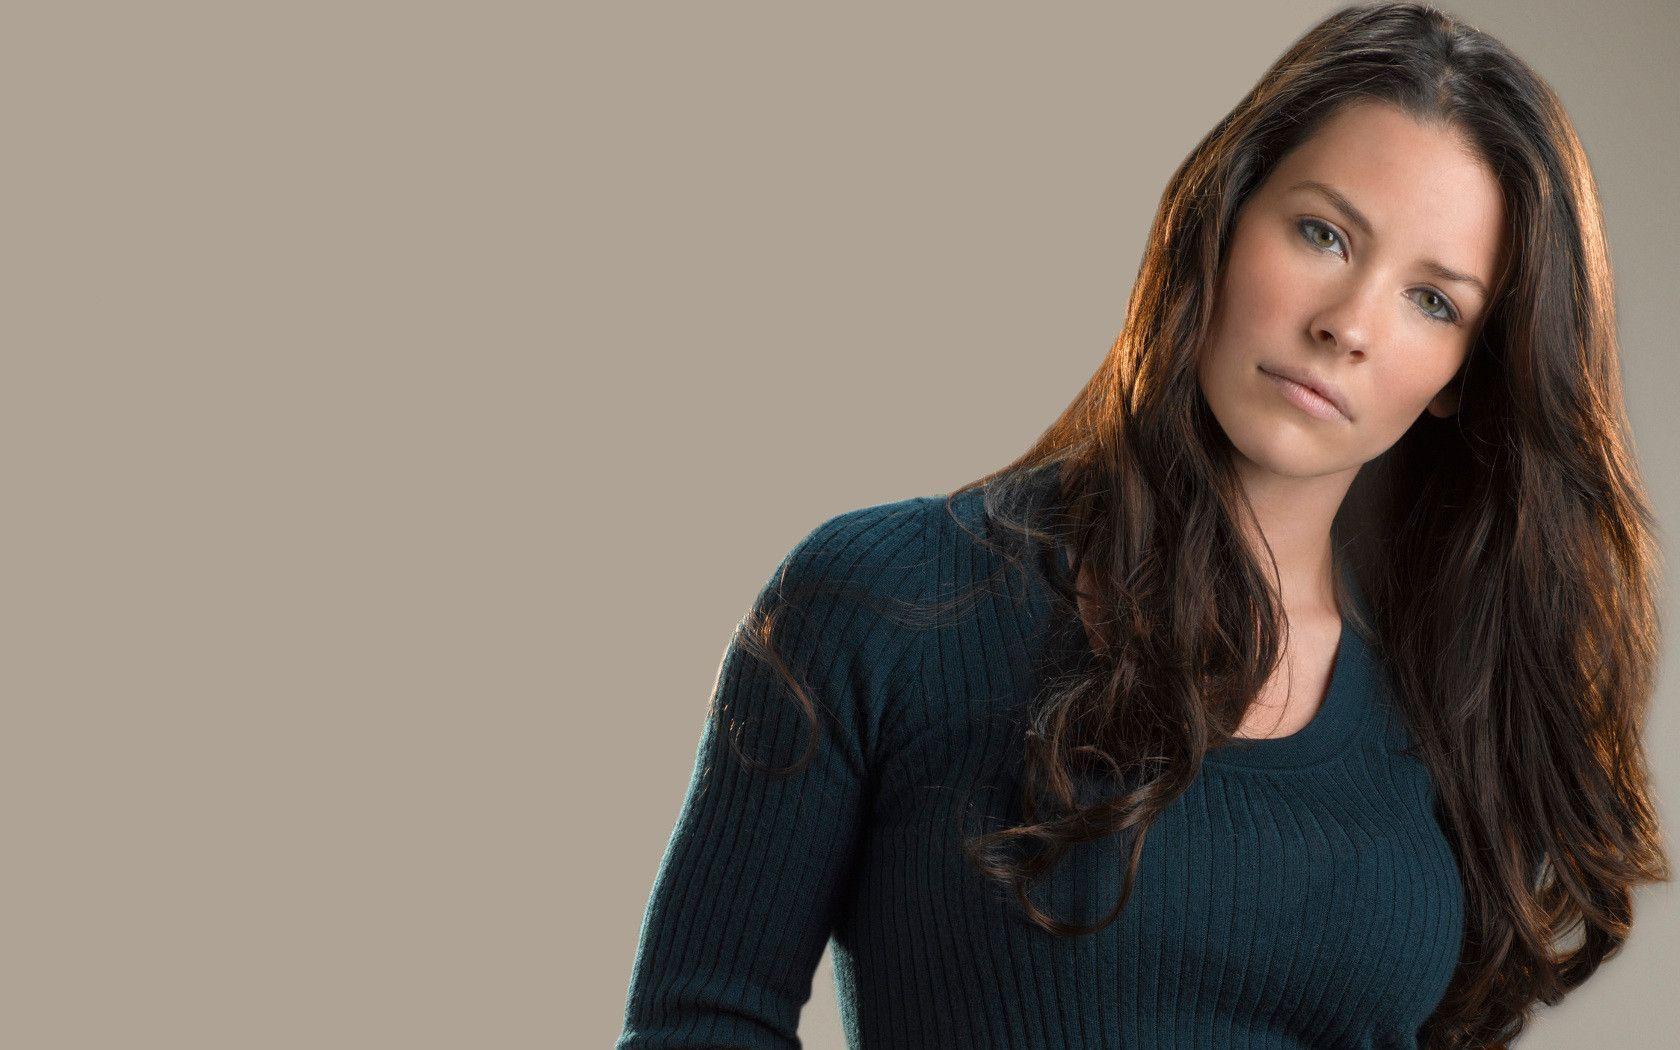 Evangeline Lilly picture